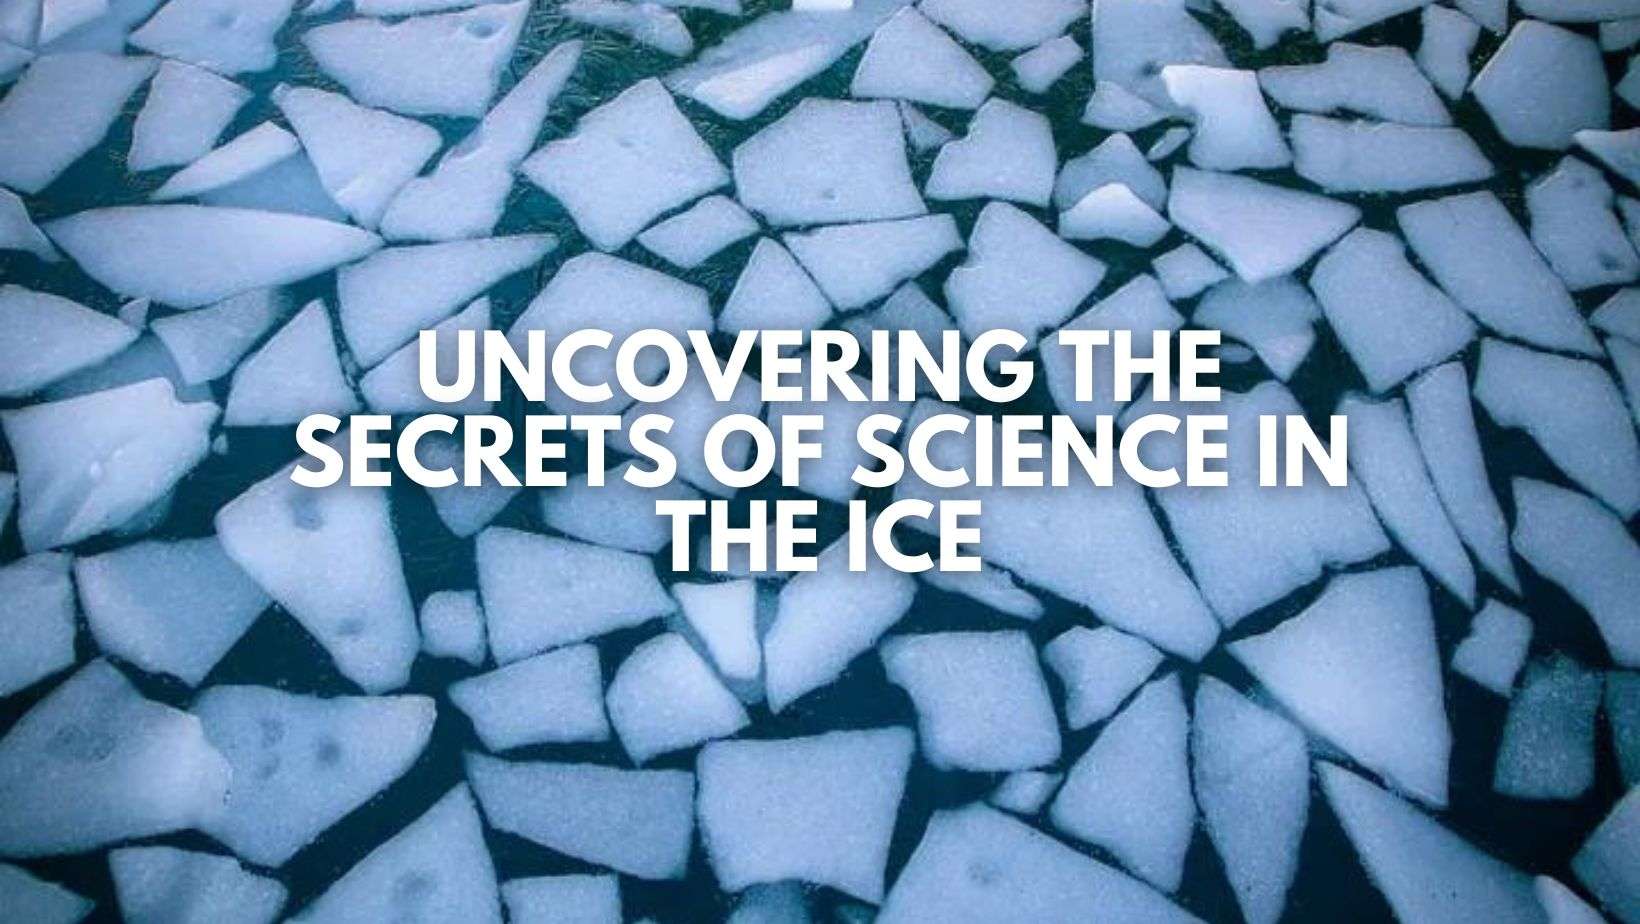 Artificial Intelligence Reveals To Scientists Secrets Of “ICE Formation”